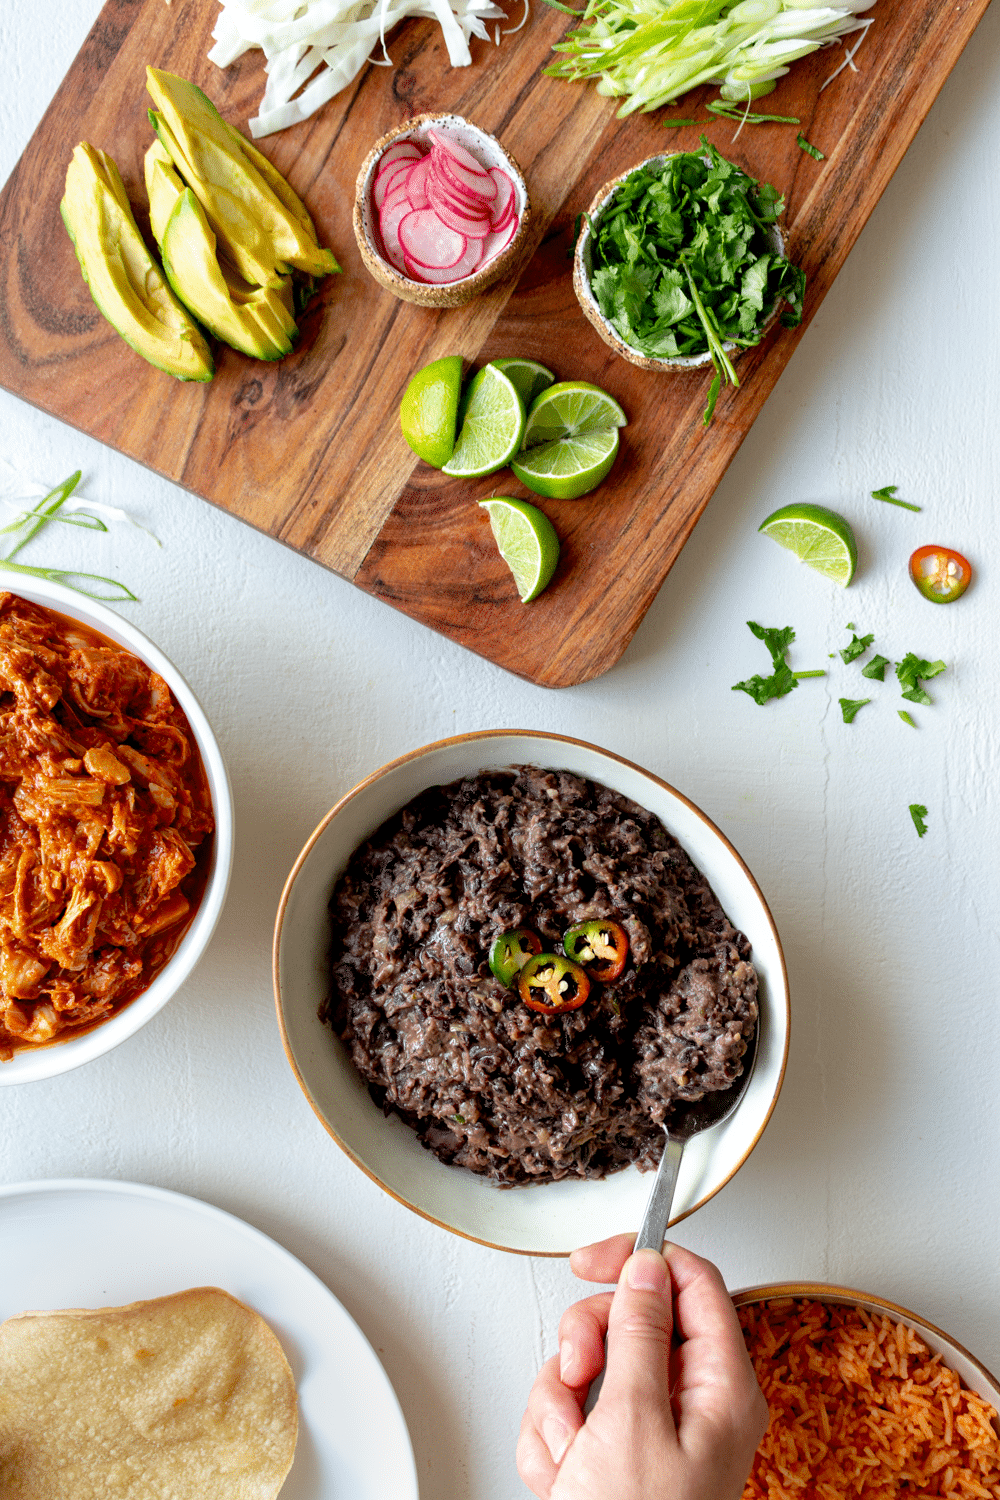 This recipe for 20-minute, easy refried black beans is hard to beat. Packed with the flavors of garlic, onion, and jalapeño, these black beans are the perfect addition to every Mexican-inspired meal. (You'd never expect they're canned beans!)